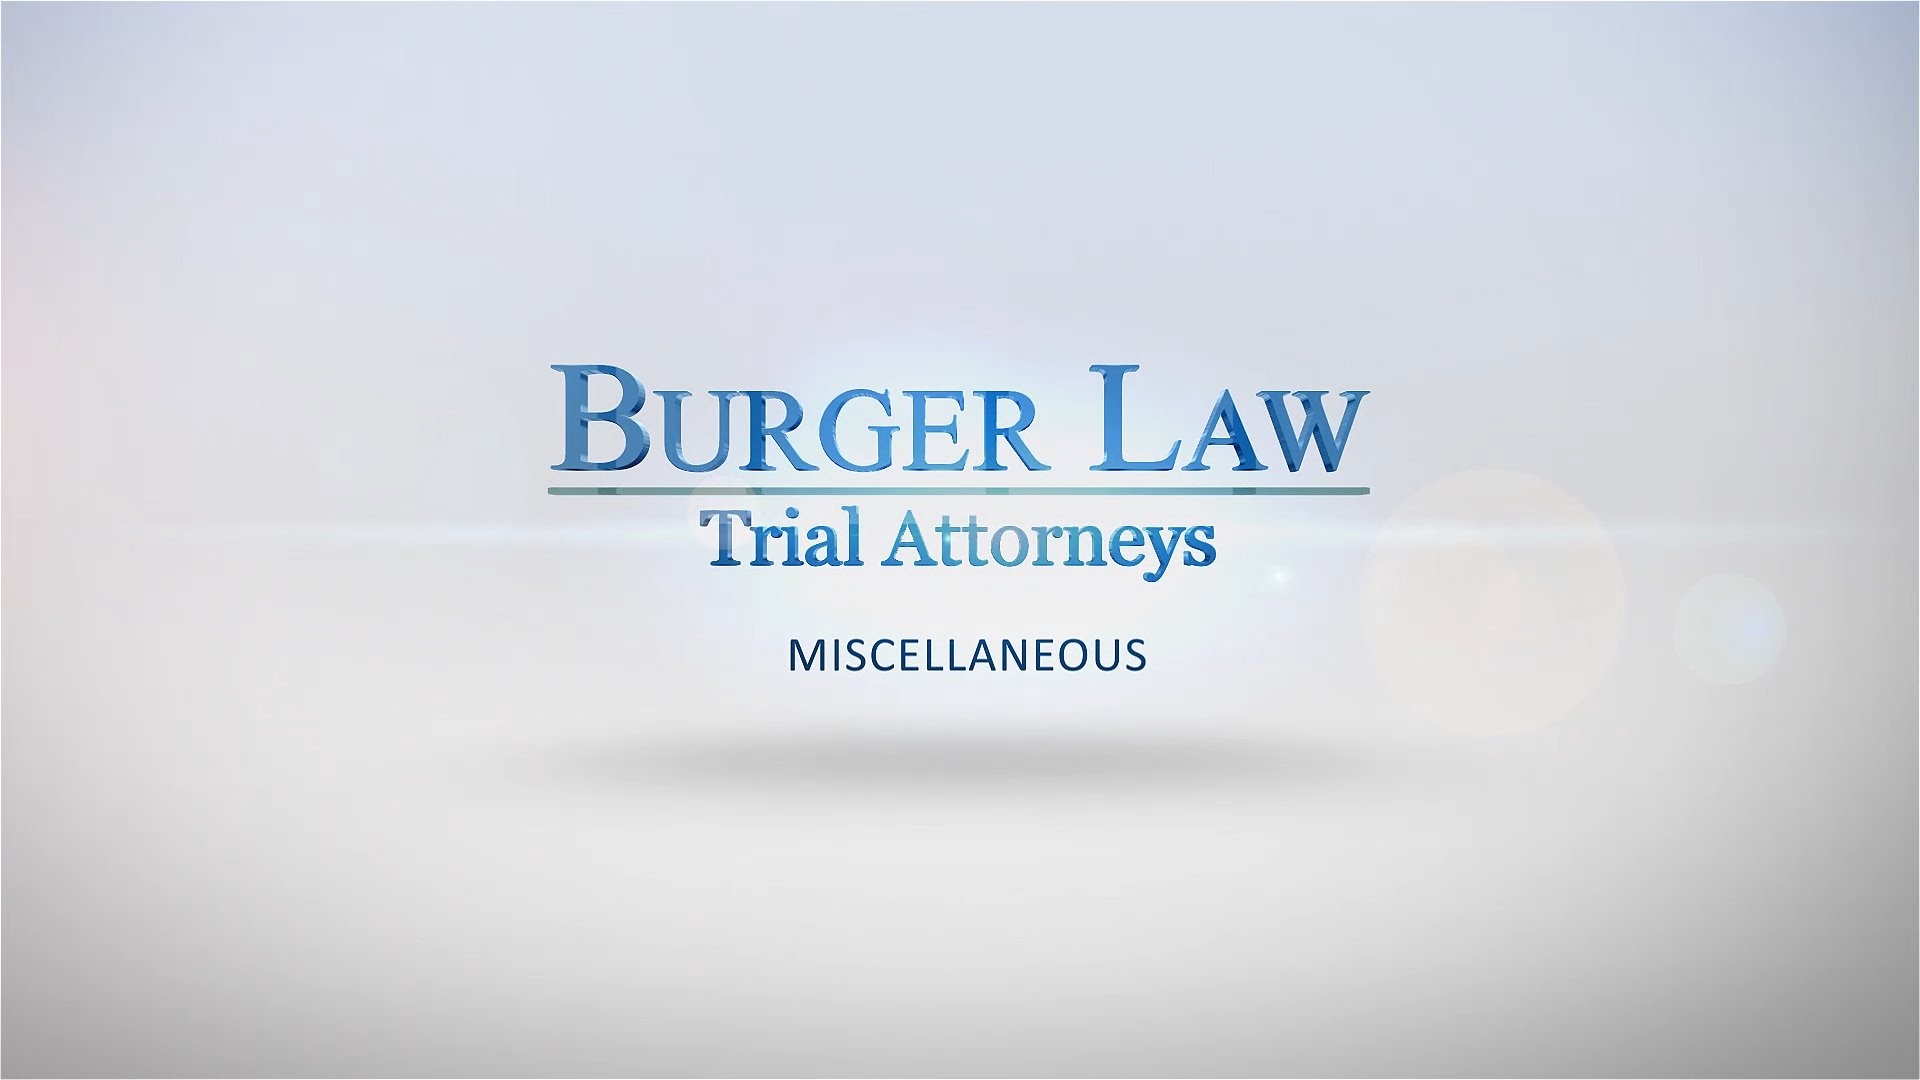 Personal Injury Accident Tips | Personal Injury Attorney in St Louis, MO - BurgerLaw.com